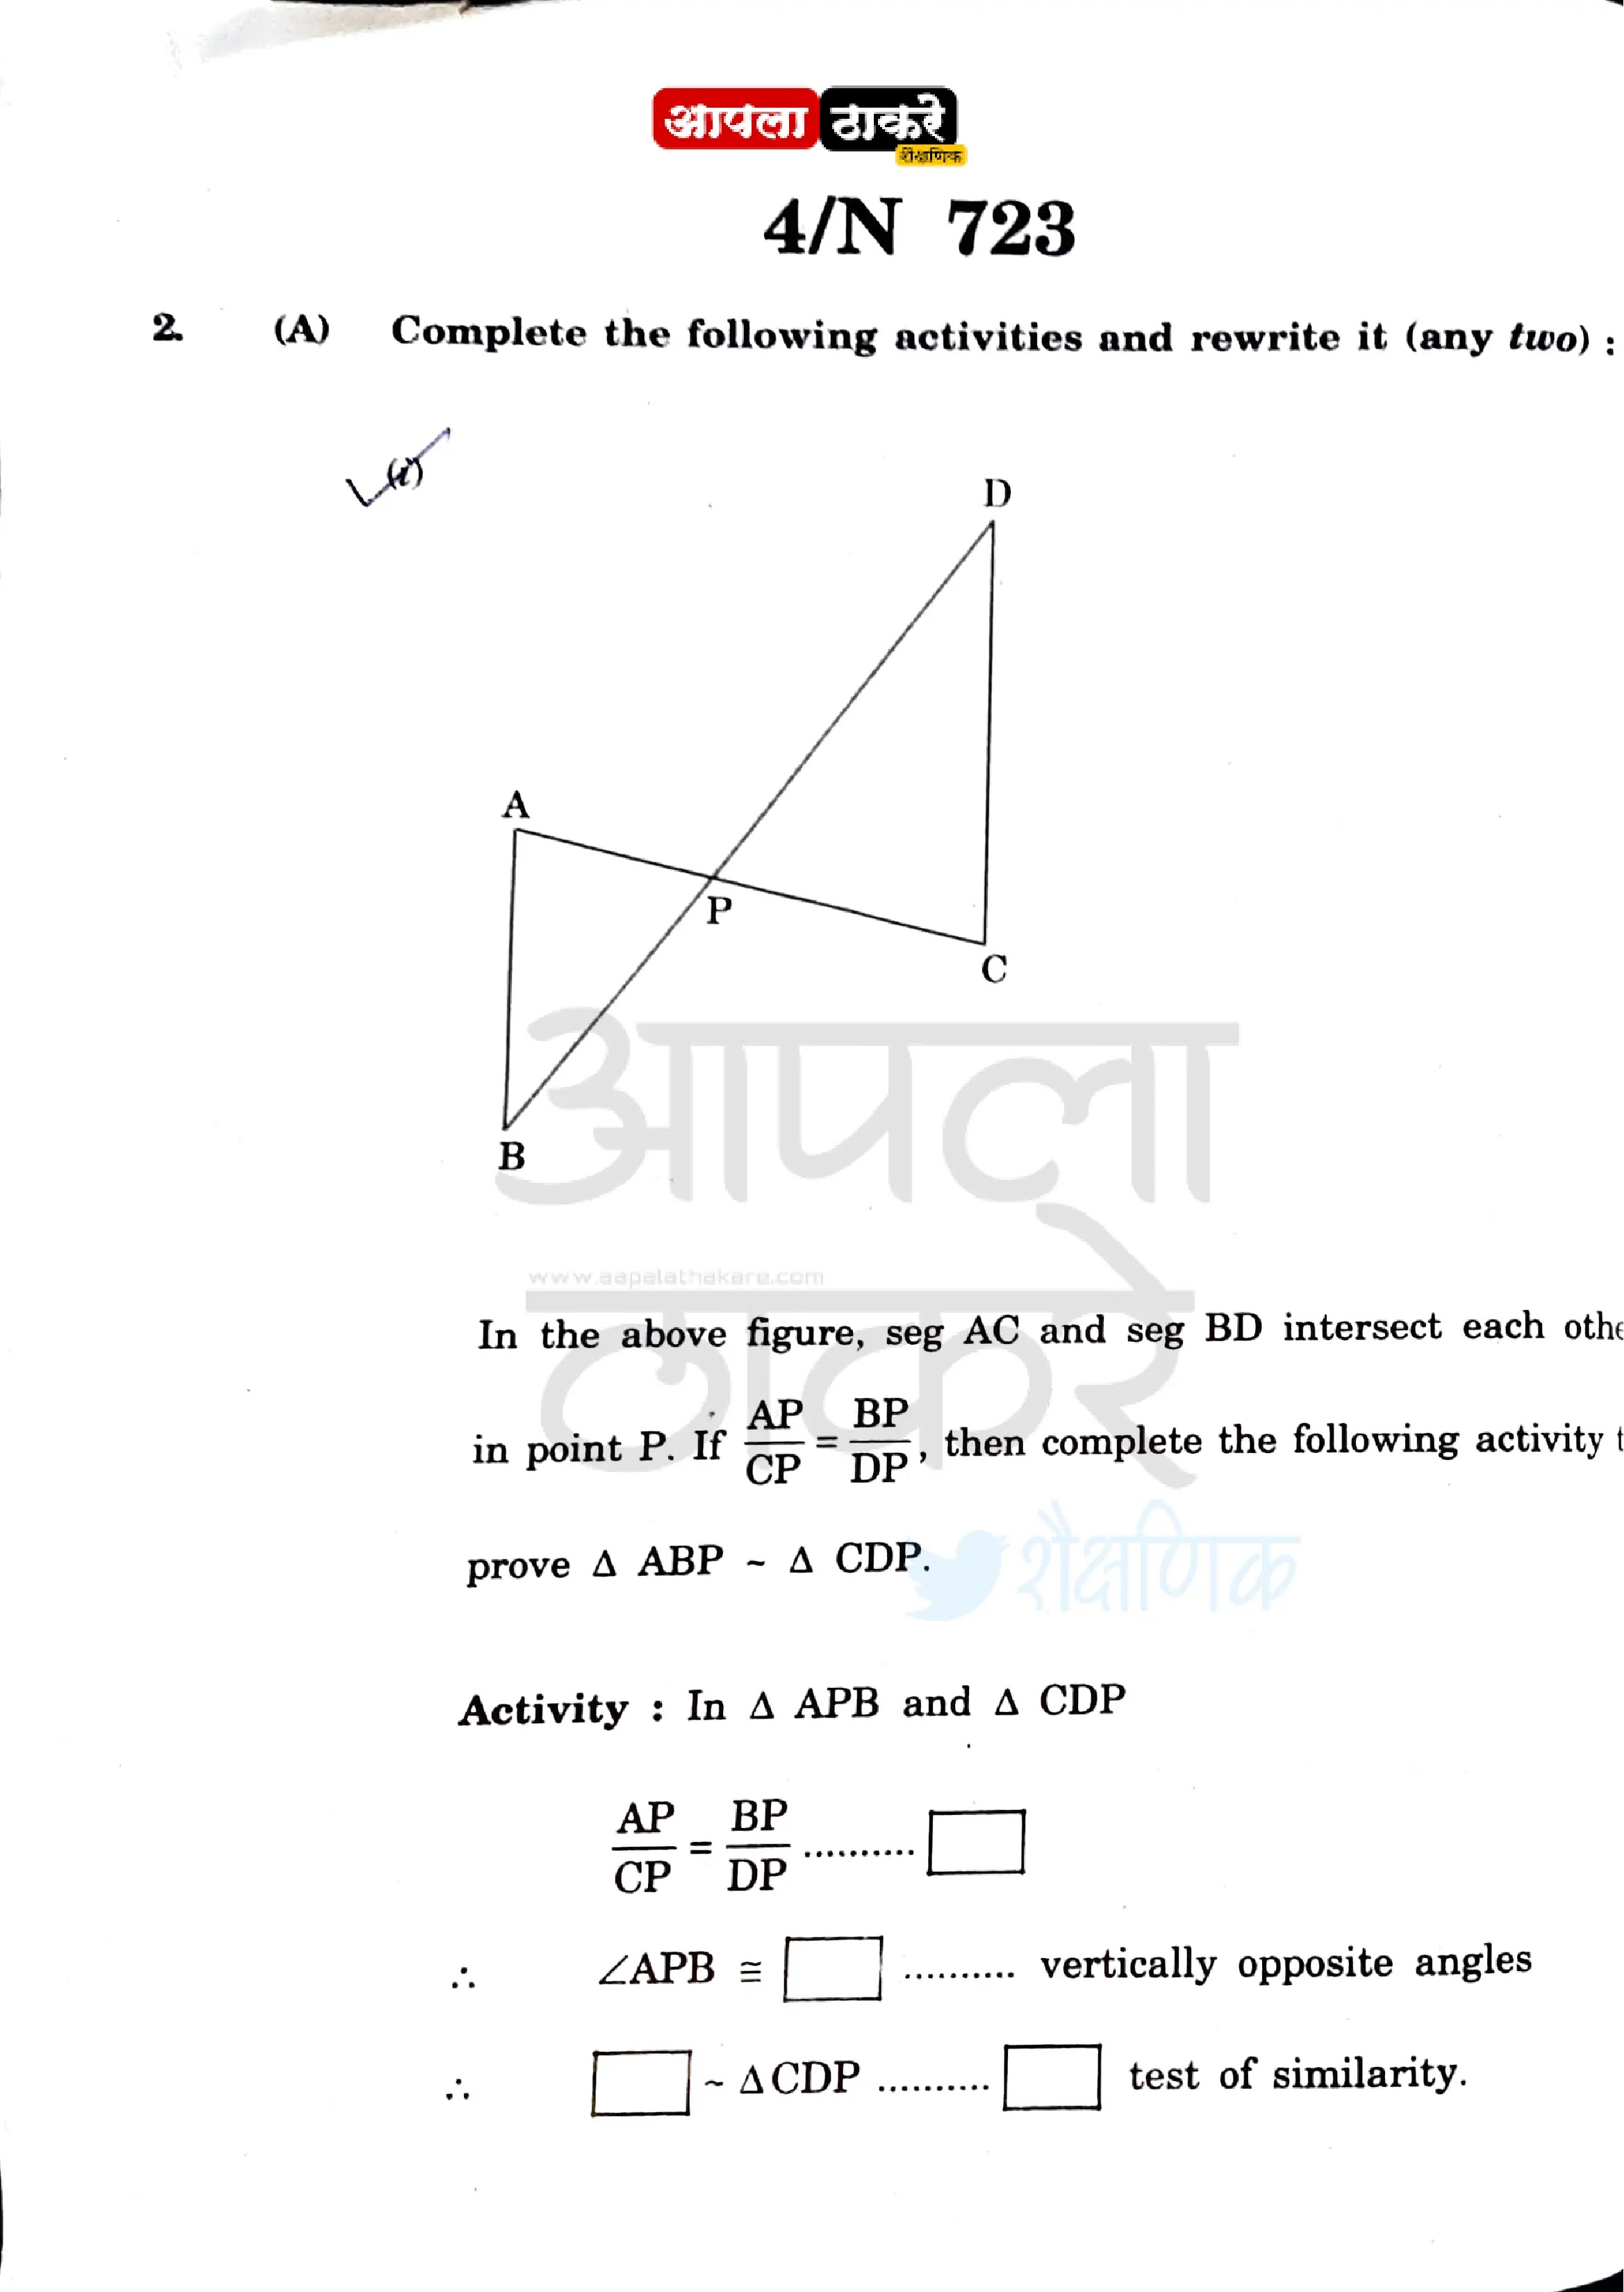 10th class geometry question paper,grade 10 geometry exam papers,10th class question paper and answer,10th class question papers 2017,10th grade geometry answers,10th ssc board geometry question paper 2022,10th ssc board geometry question paper 2022 pdf,10th ssc board geometry question paper 2019,10th ssc board geometry question paper 2019 pdf,10th 2019 question paper with answer